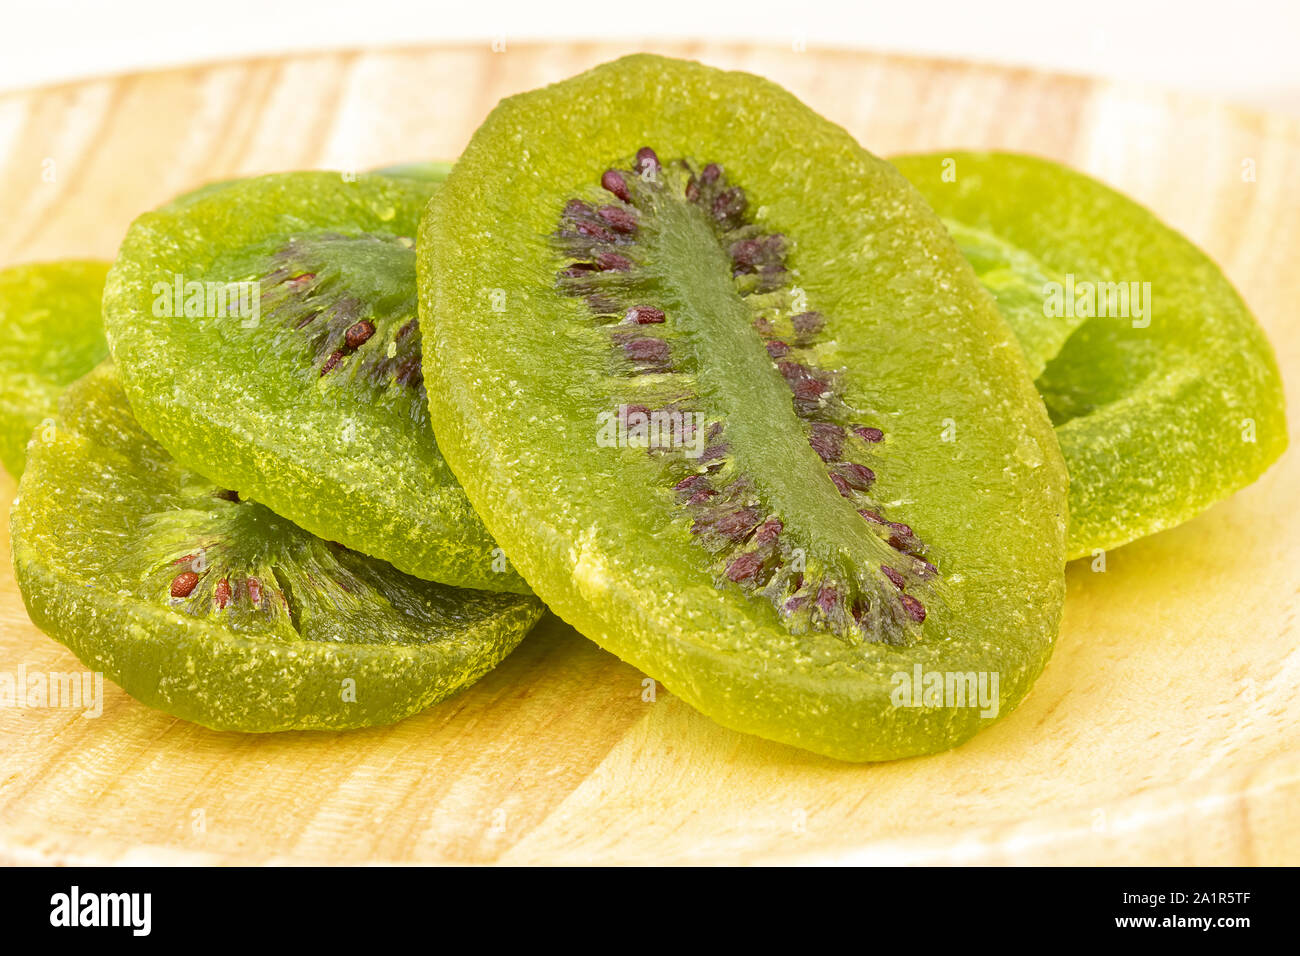 https://c8.alamy.com/comp/2A1R5TF/dehydrated-dried-sliced-natural-green-wiki-on-wooden-plate-closed-up-2A1R5TF.jpg